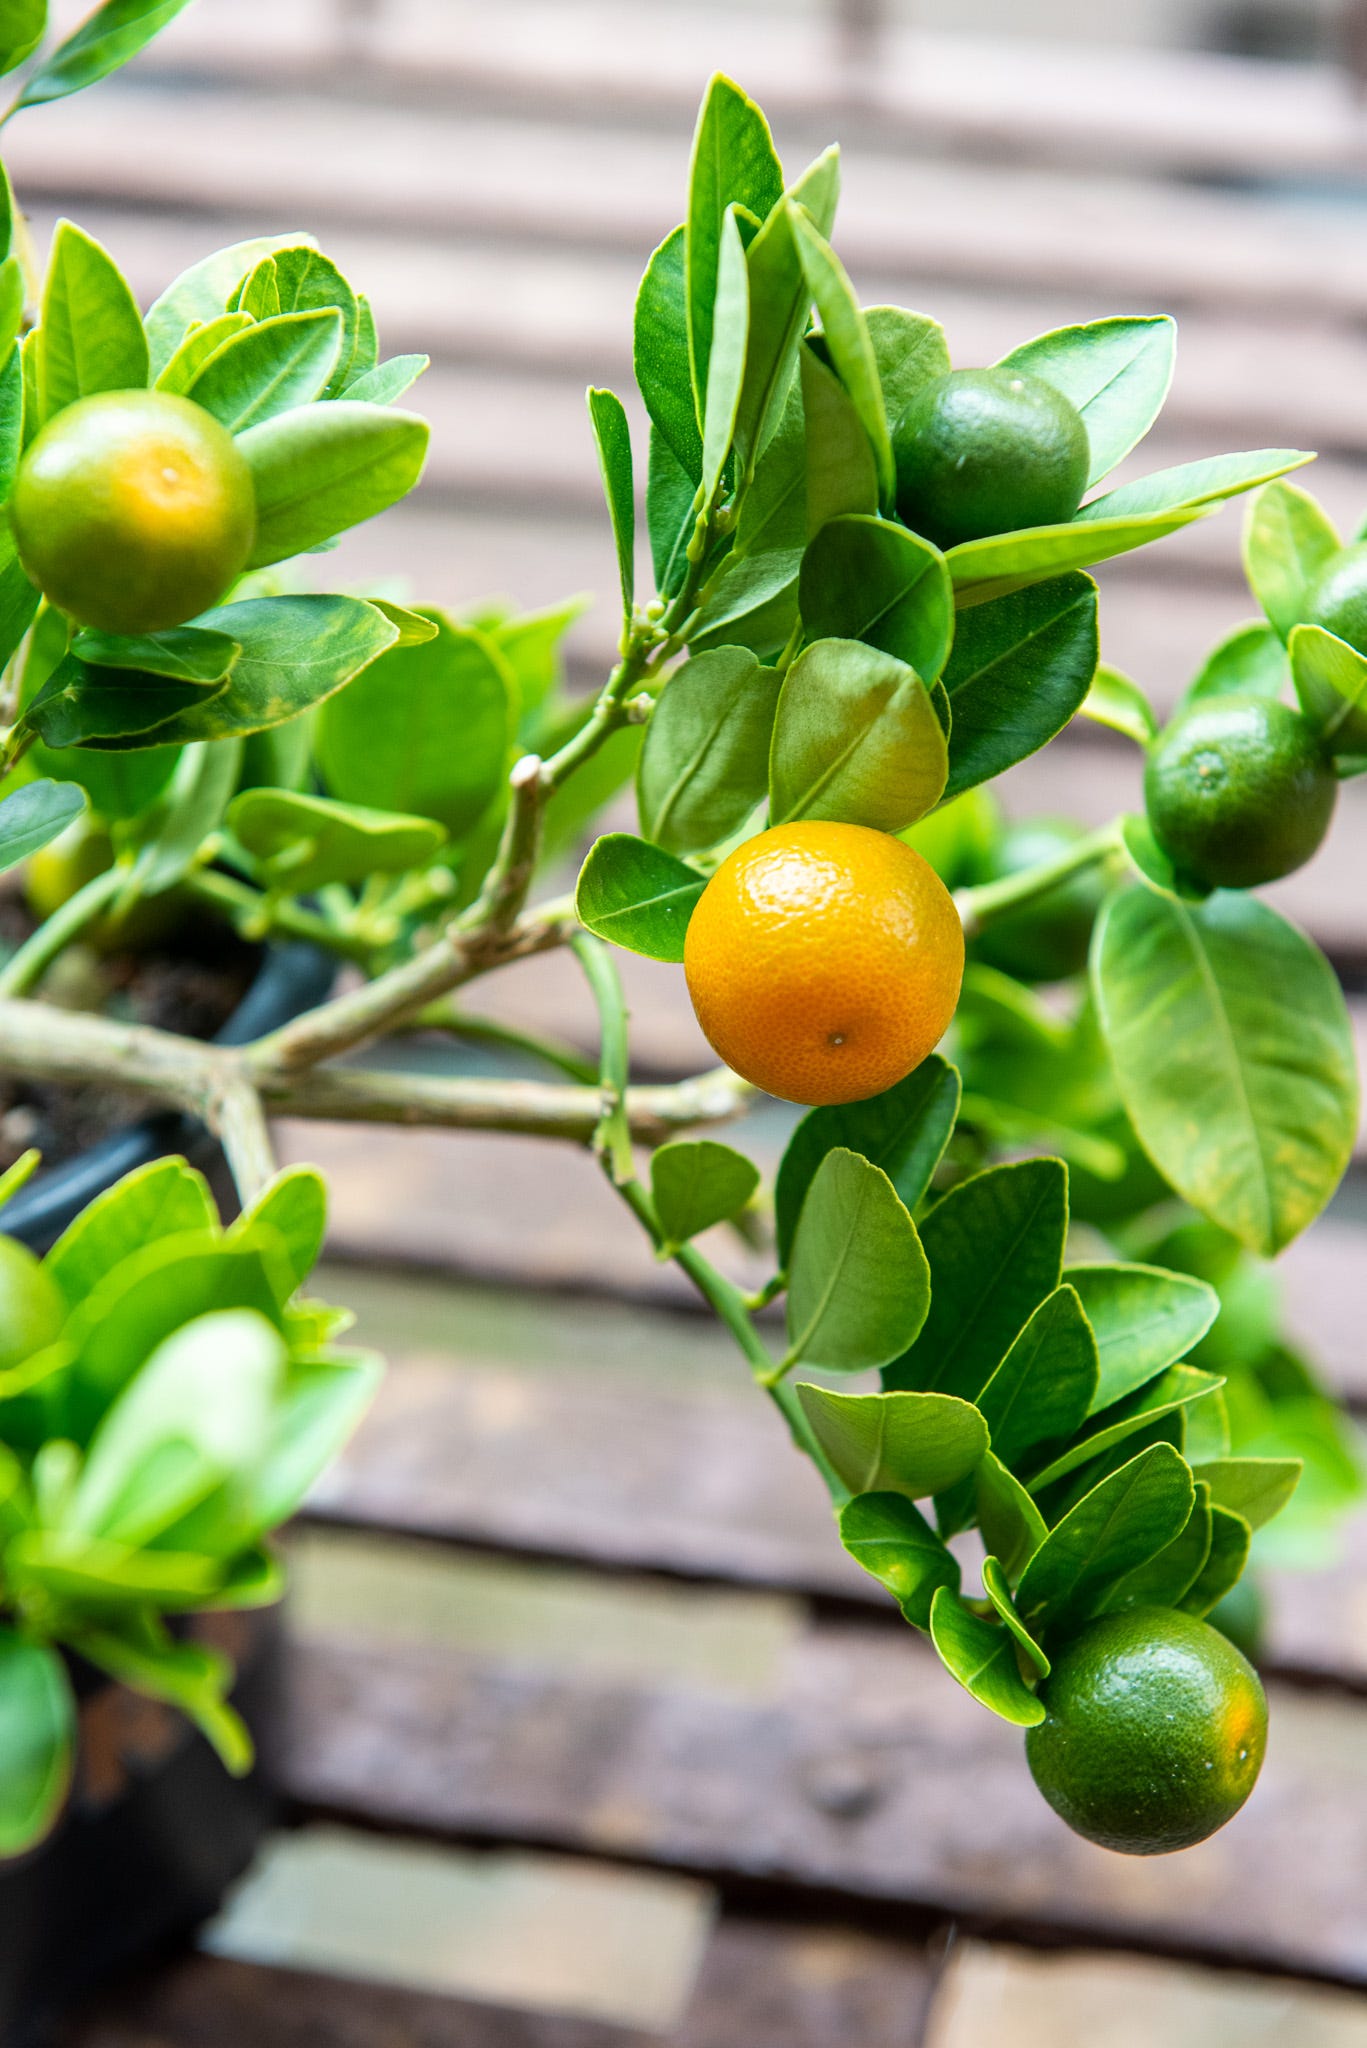 ID: Close up of ripe orange calamansi fruit with green unripe ones in the background.